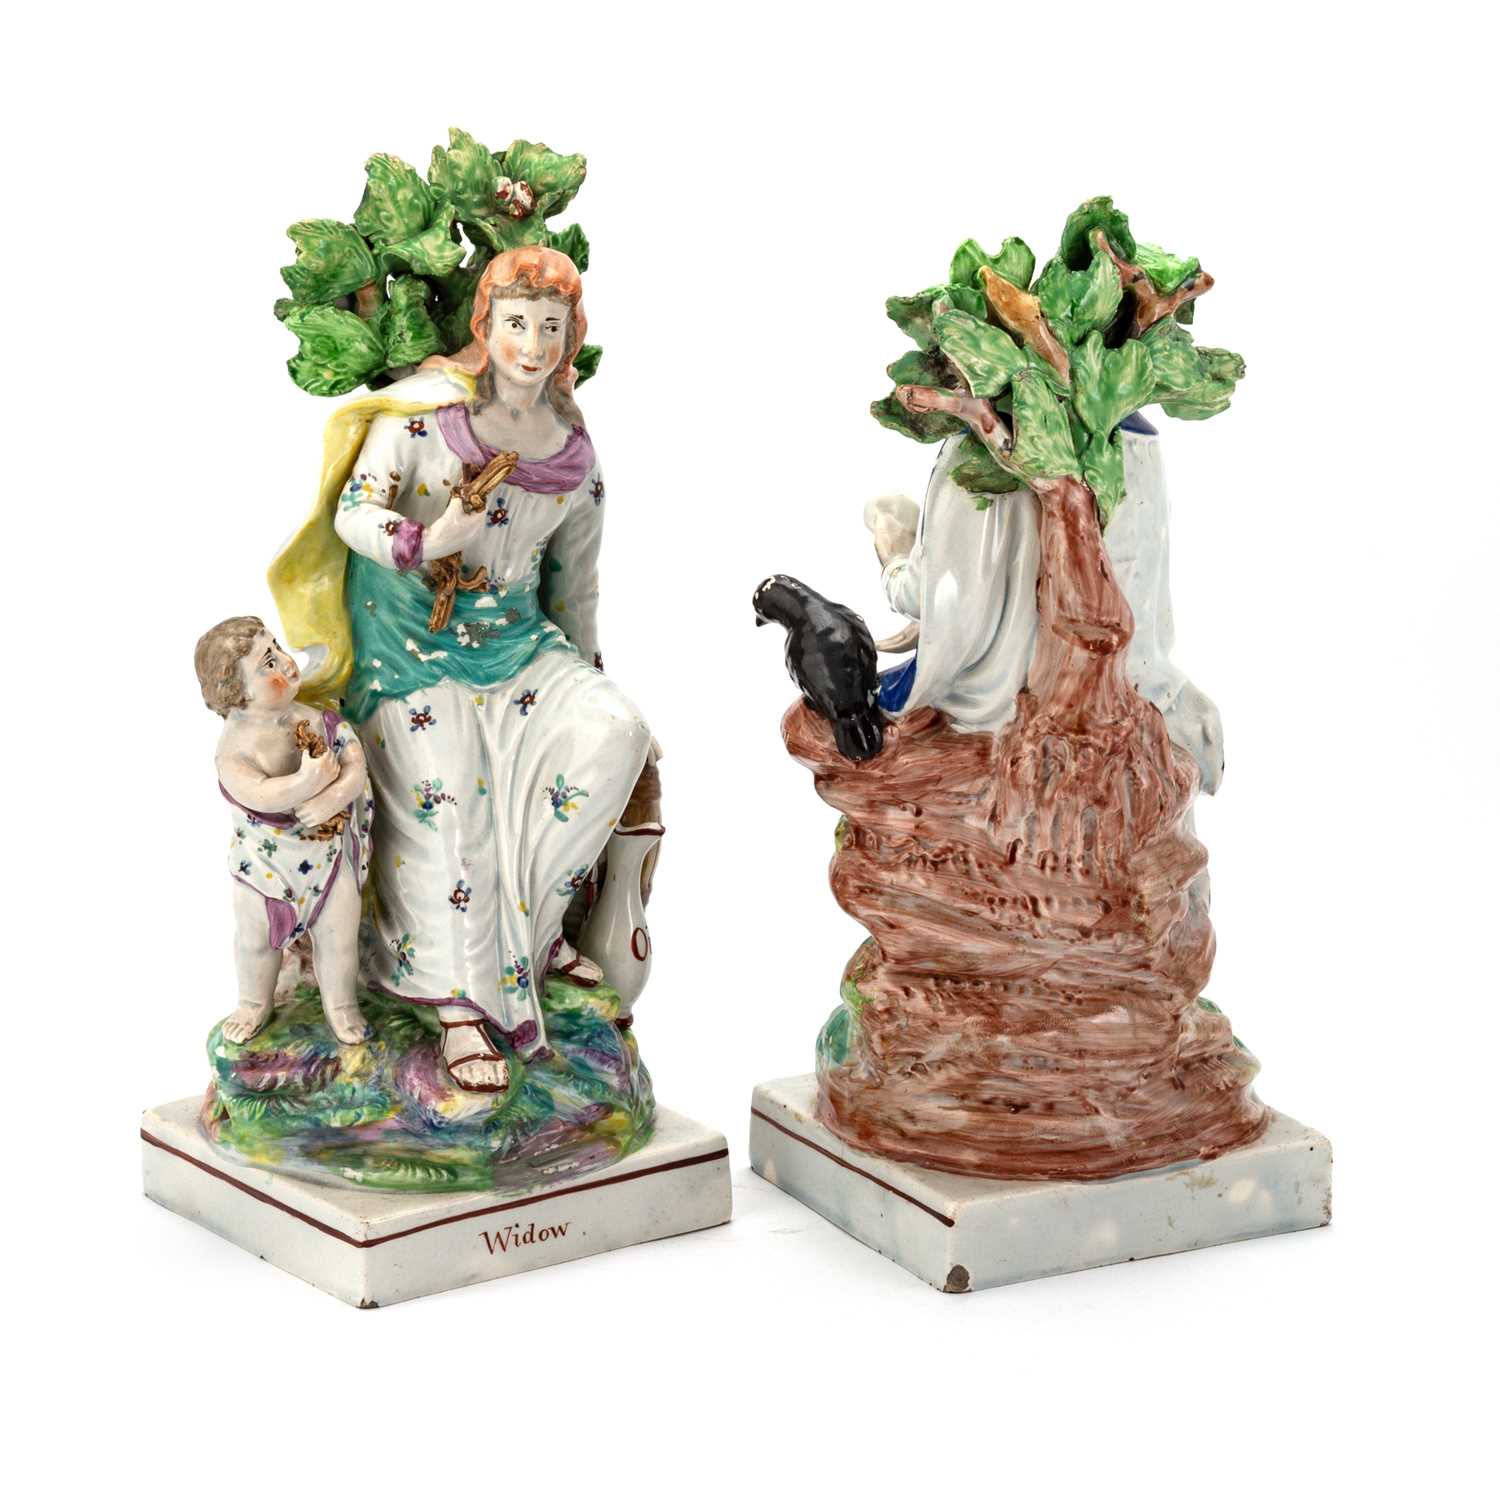 A PAIR OF ENOCH WOOD PEARLWARE FIGURES, CIRCA 1810-30 - Image 2 of 2